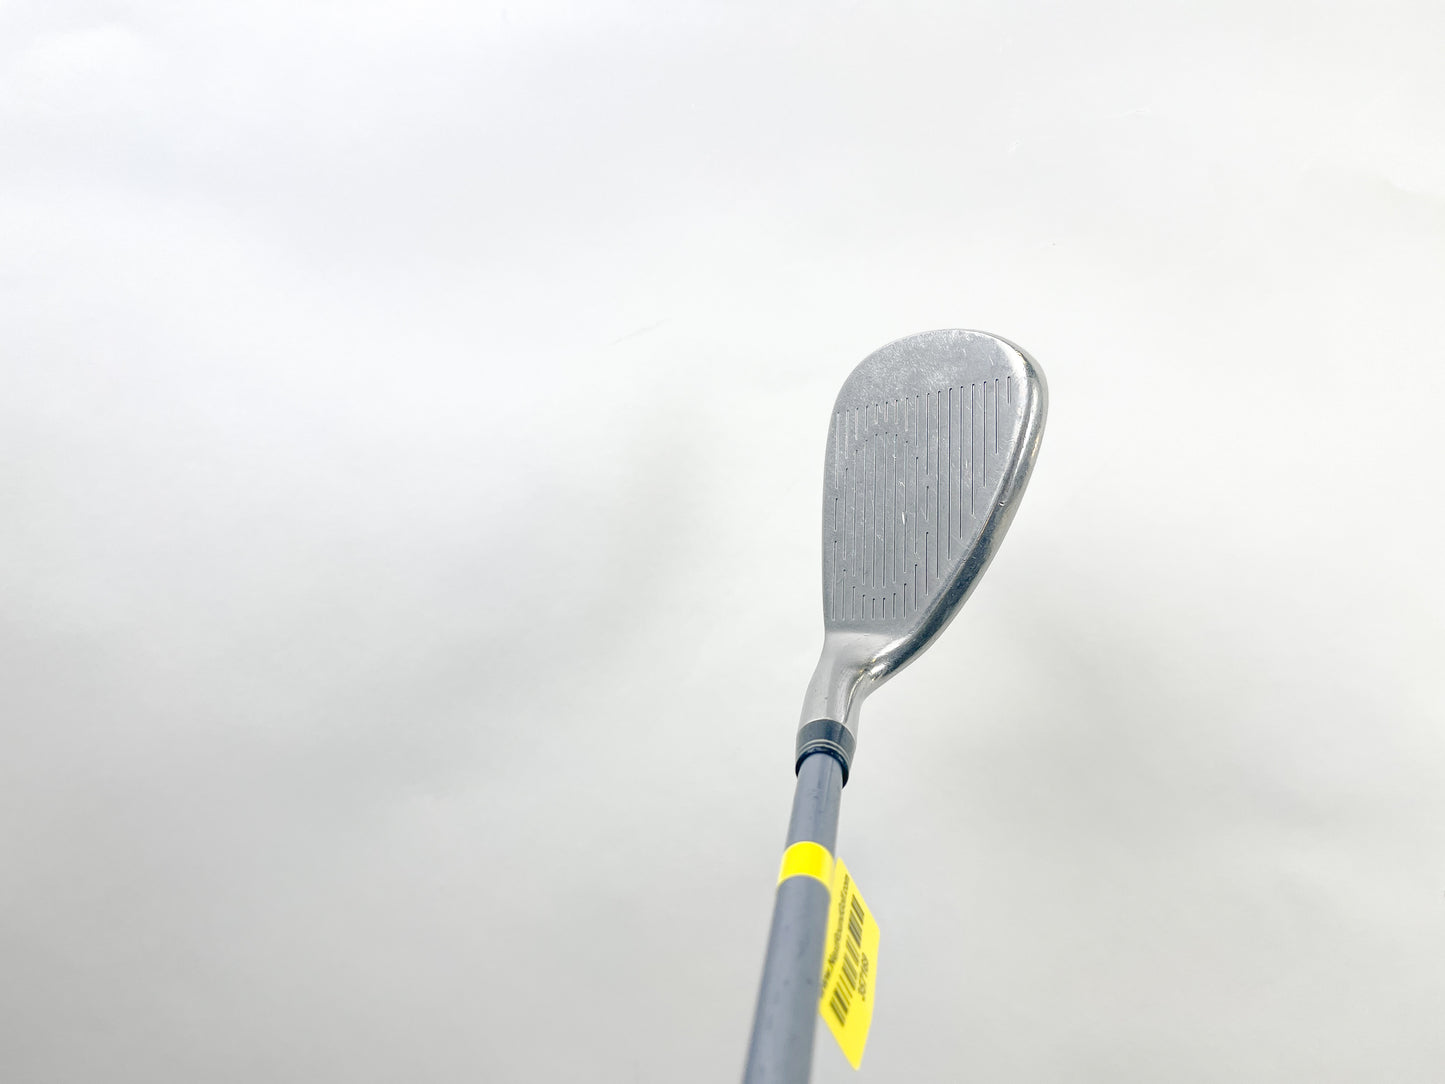 Used Cobra FP Sand Wedge - Right-Handed - 55 Degrees - Ladies Flex-Next Round